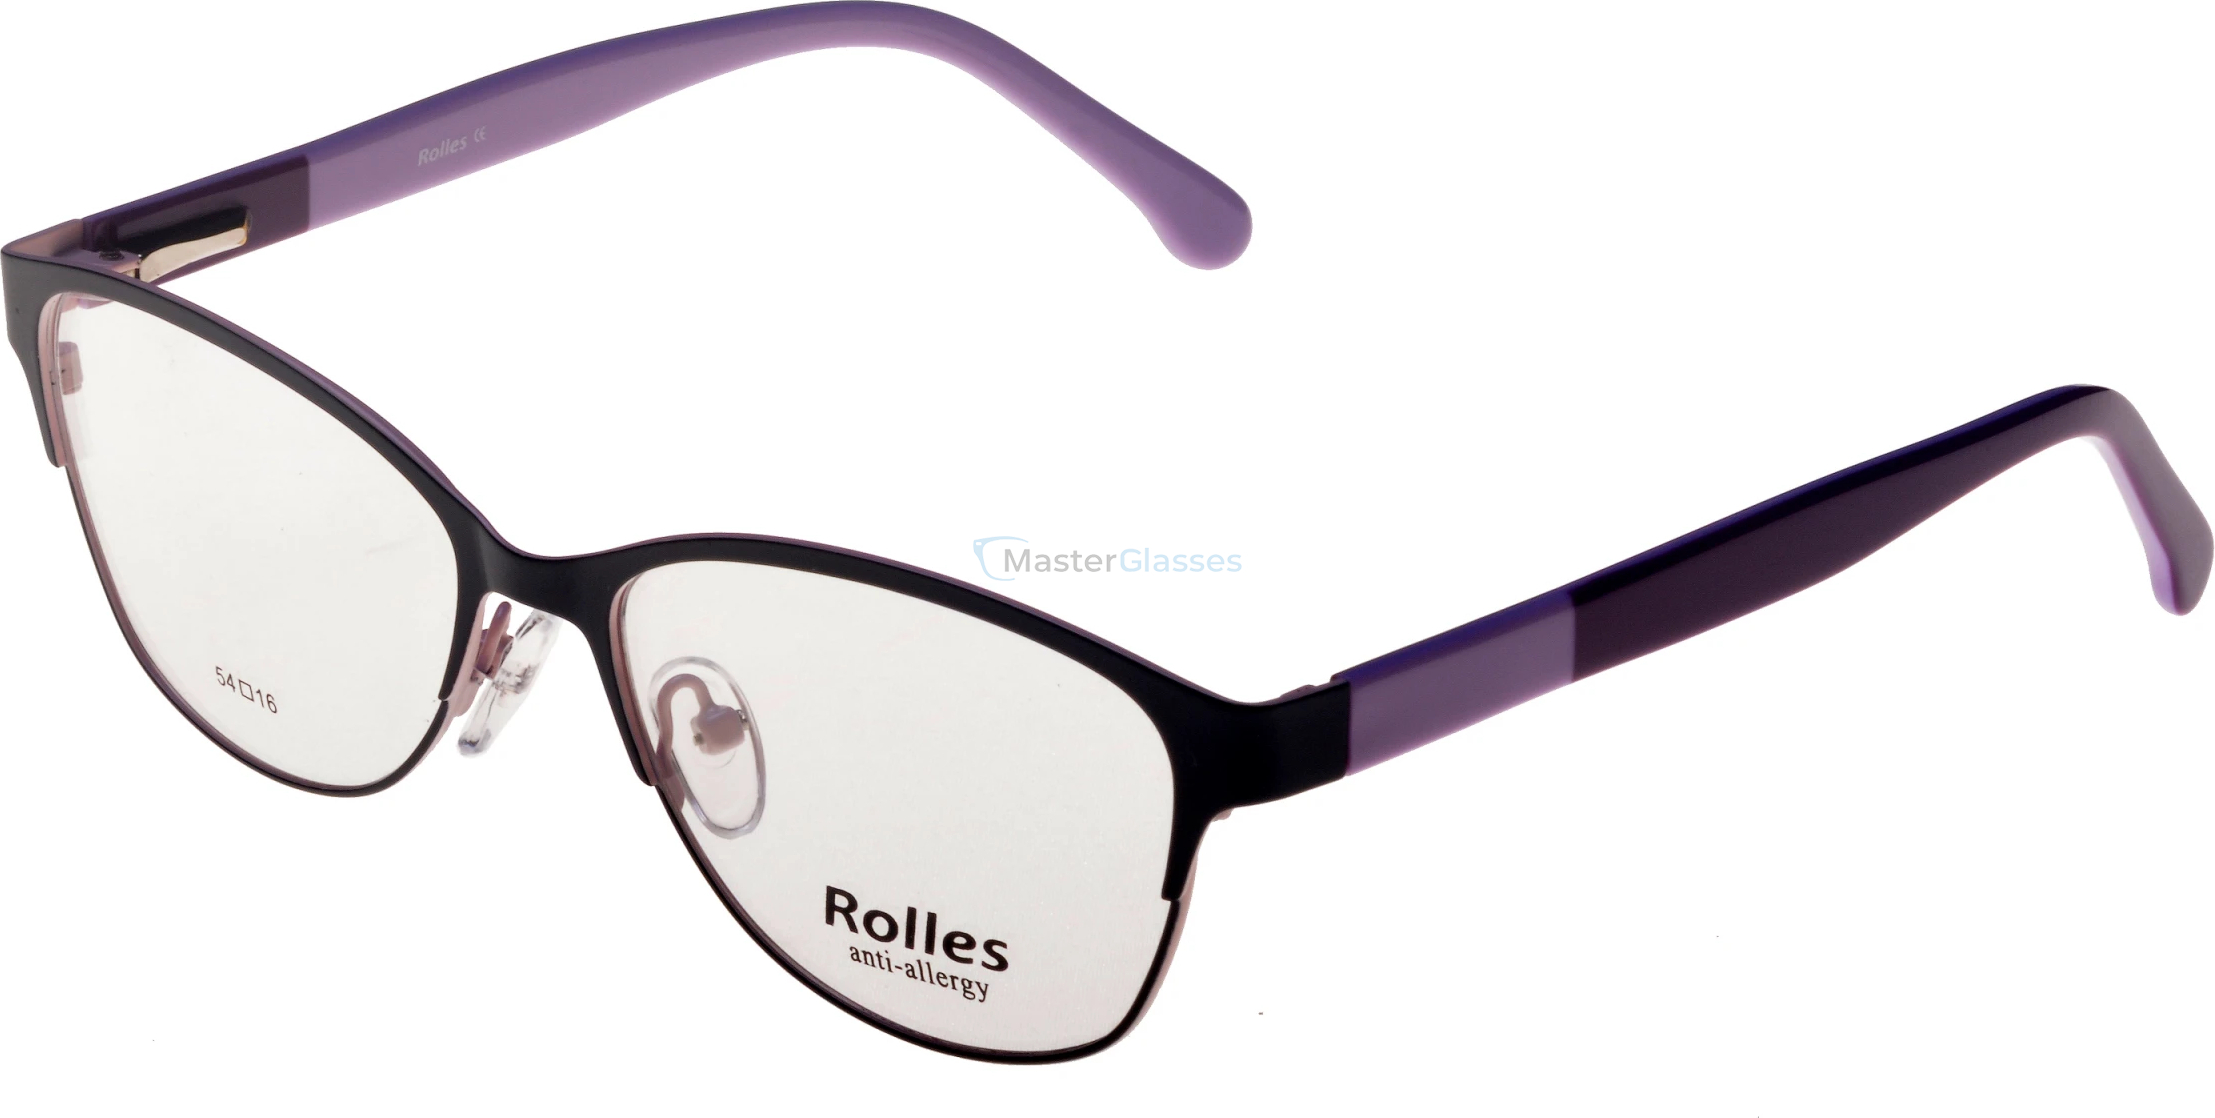  Rolles 673 01